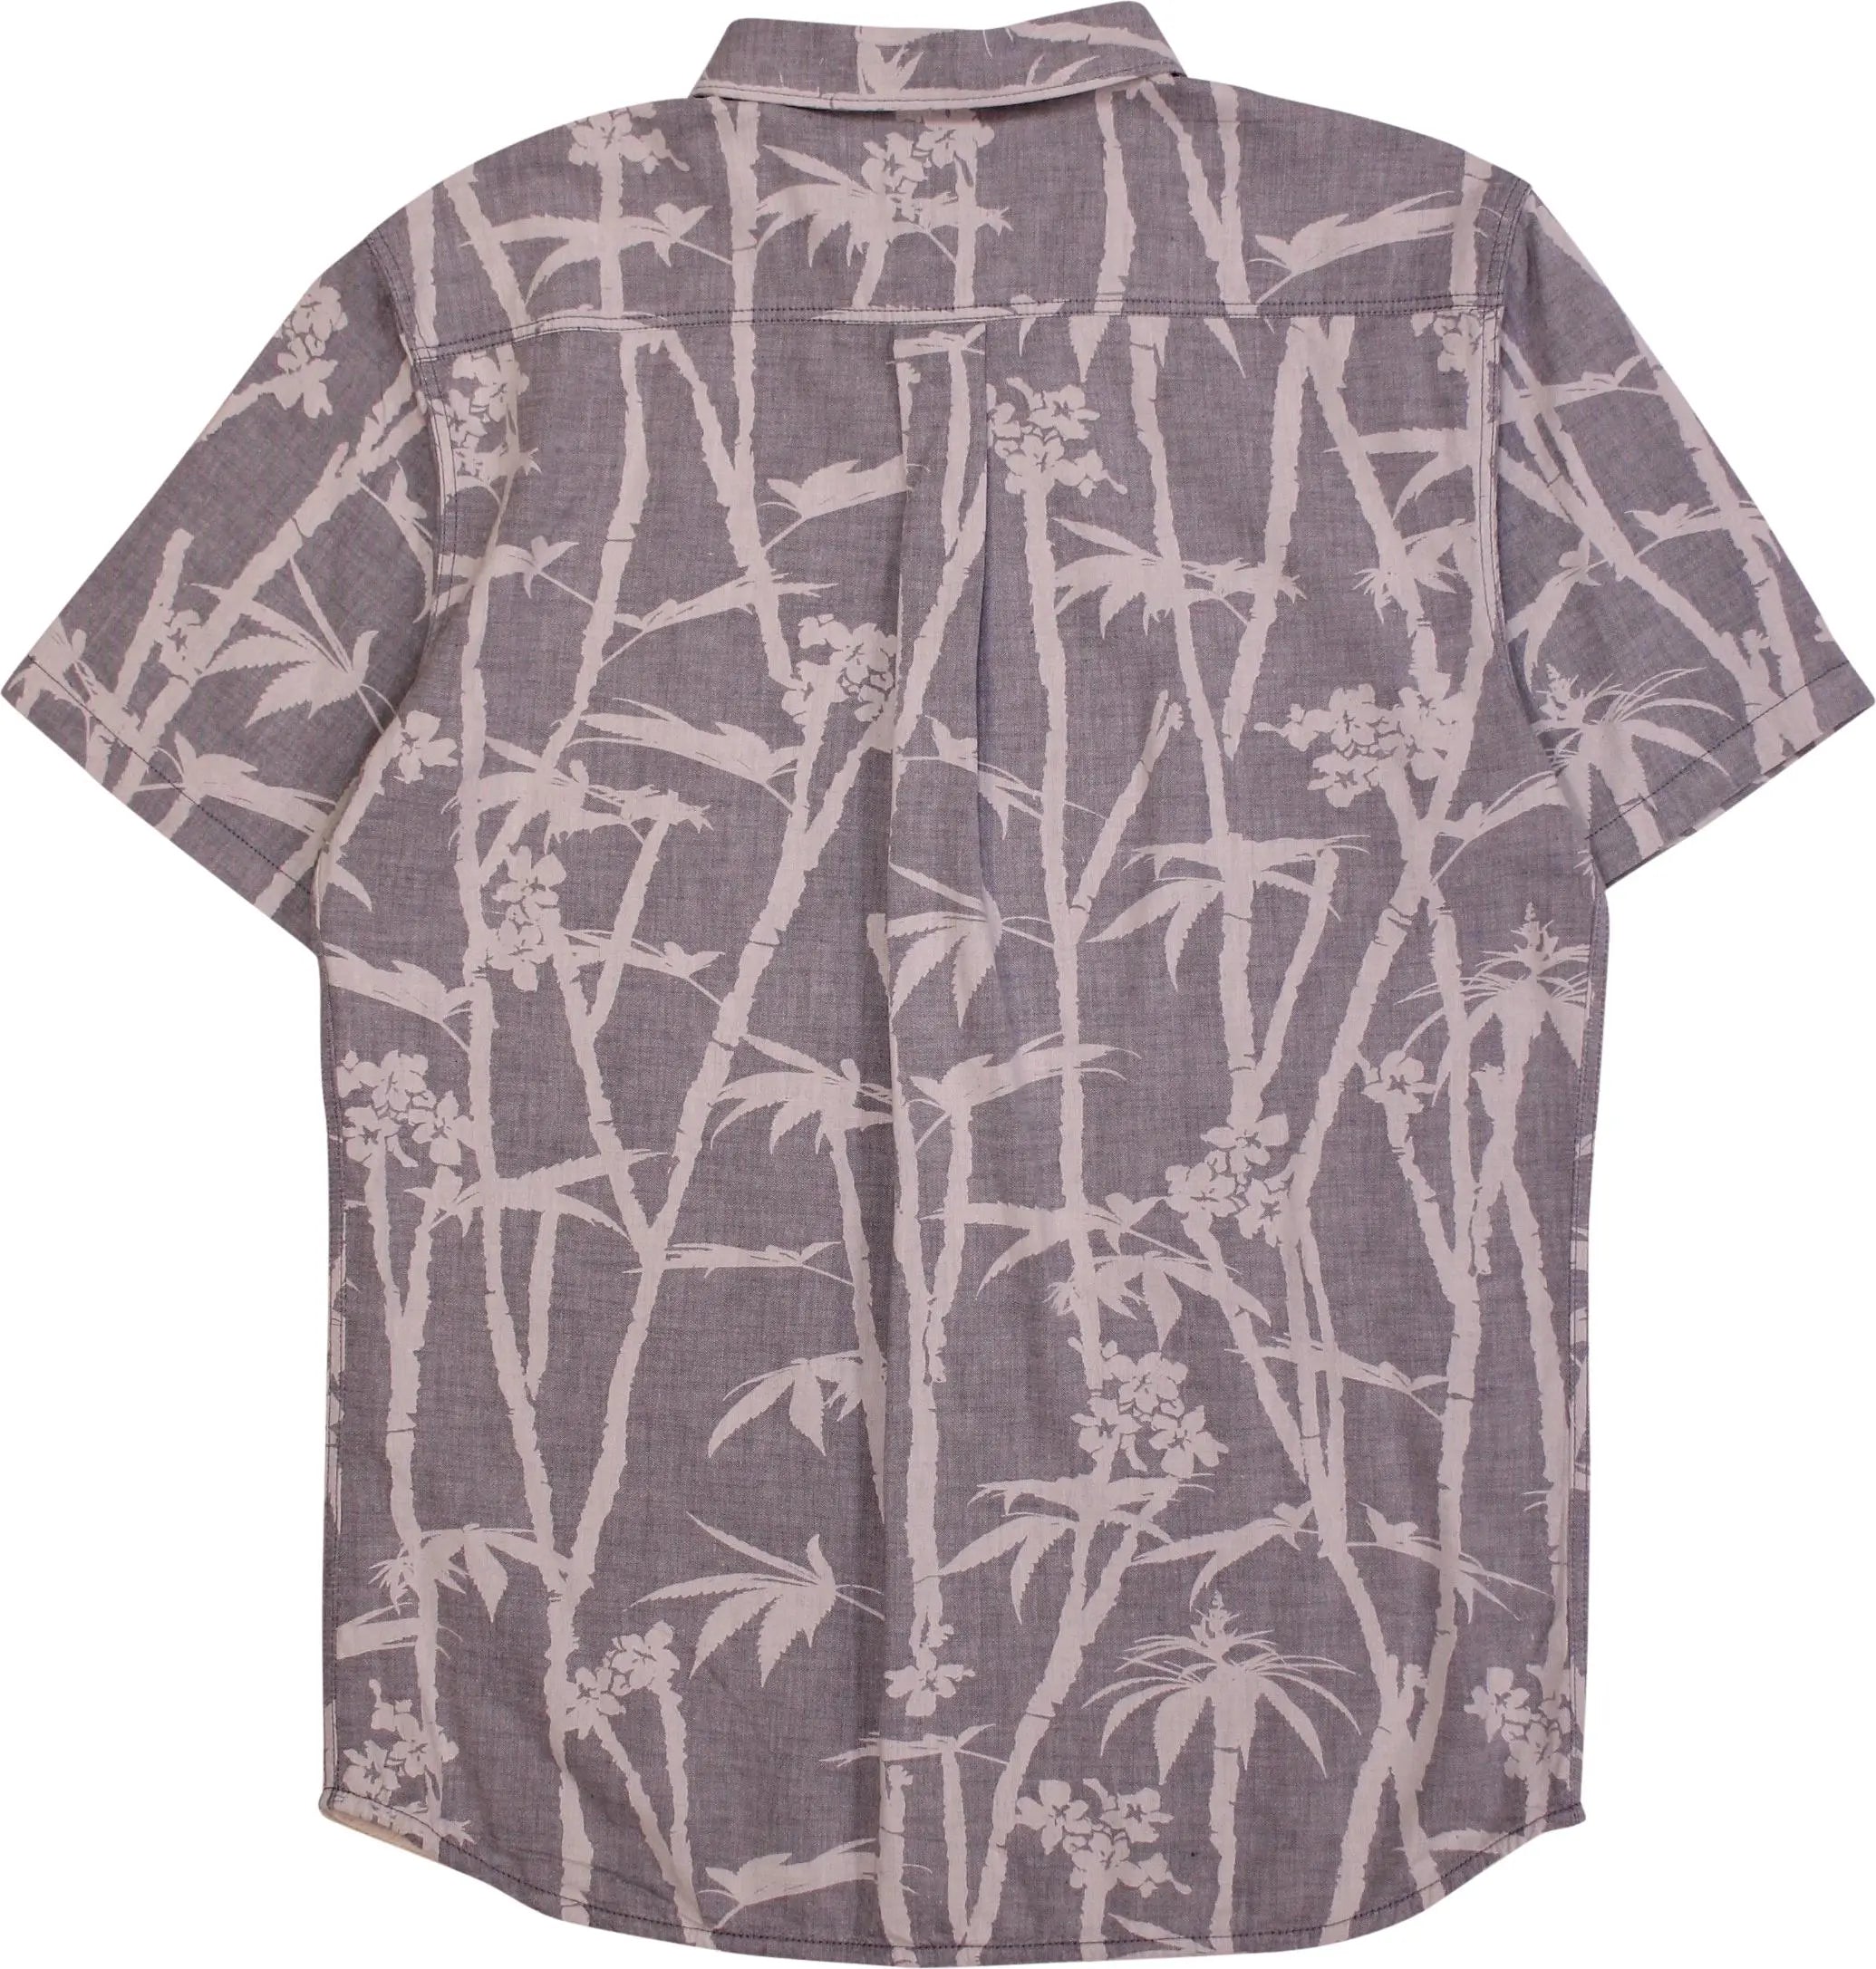 Vans - Summer Printed Grey Short Sleeve Shirt by Vans- ThriftTale.com - Vintage and second handclothing